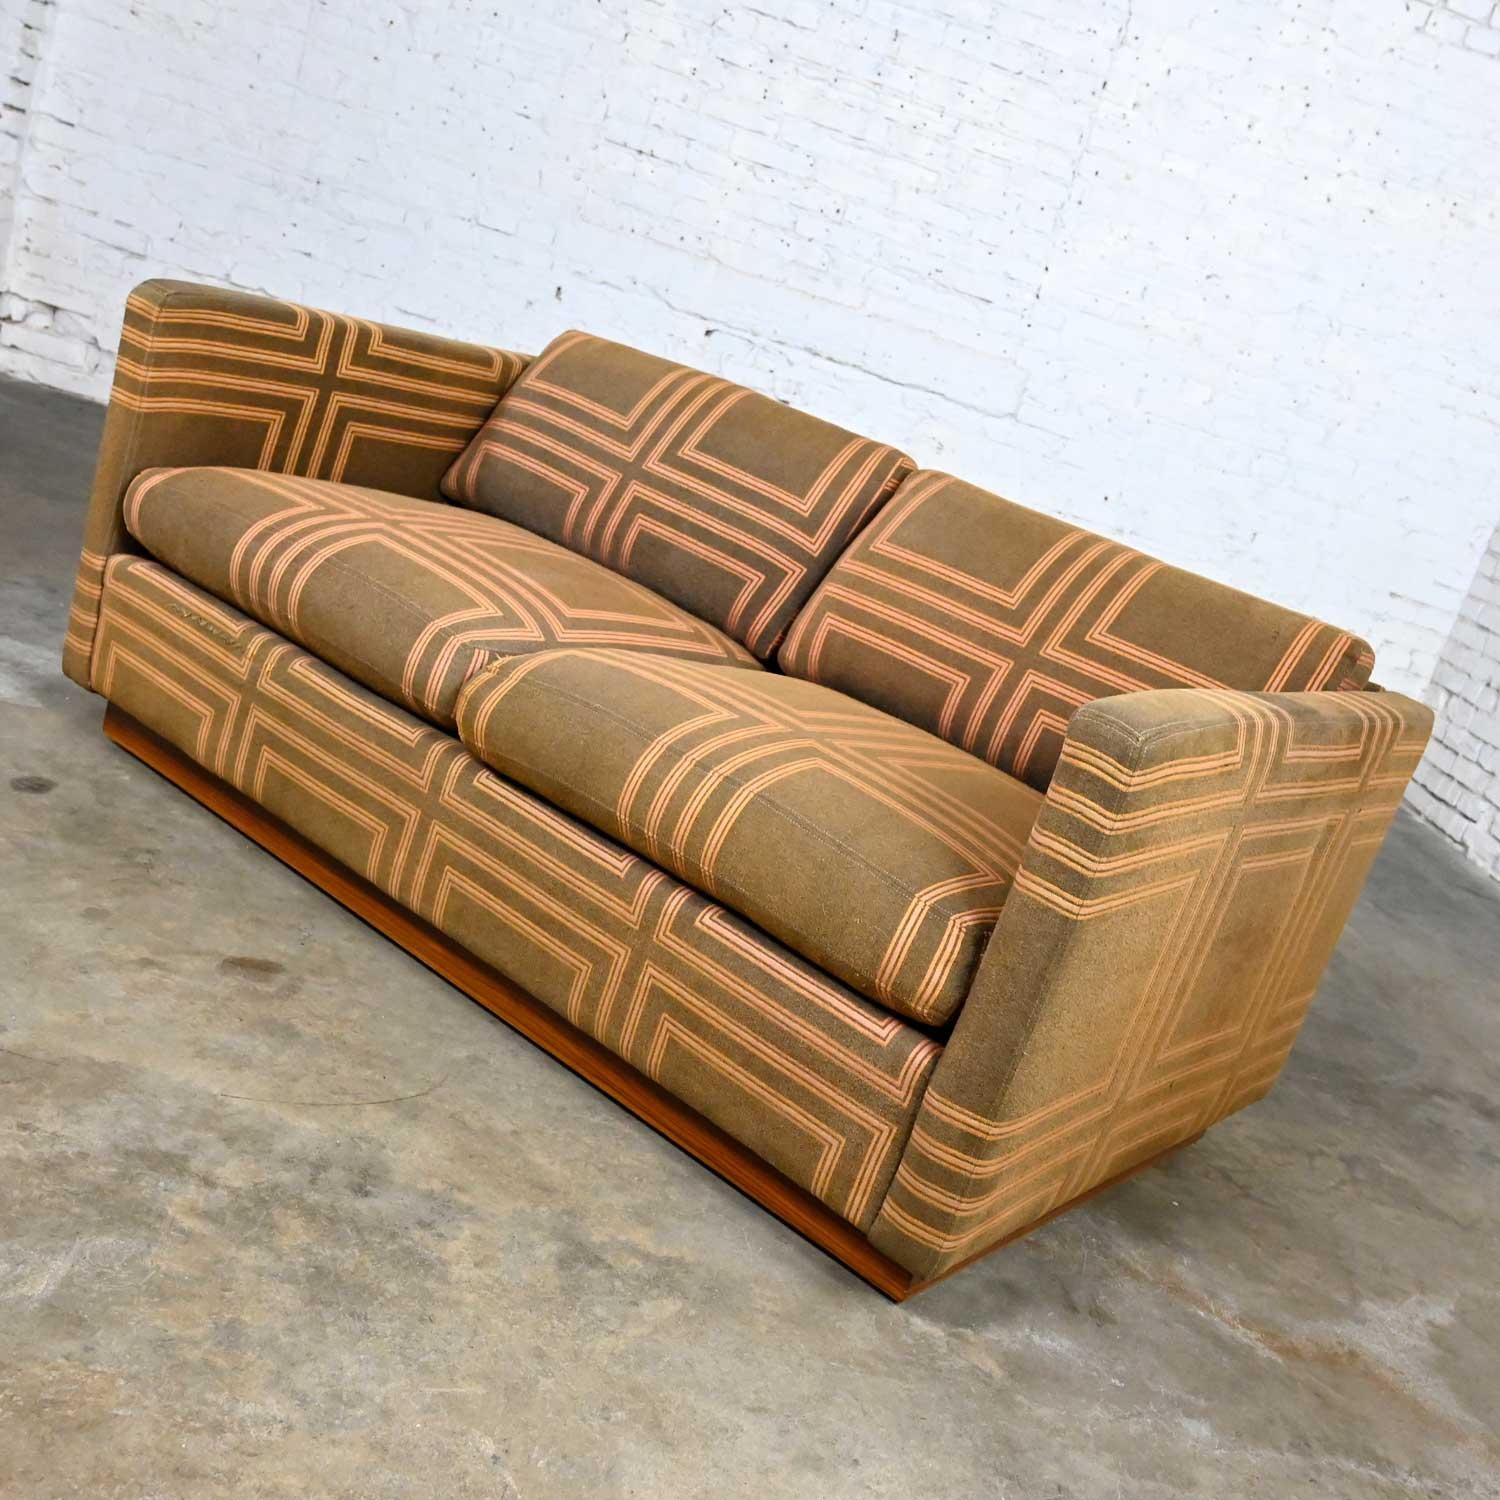 Fabulous vintage modern brown & orange-ish tuxedo love seat sofa on zingana wood veneer platform base by Milo Baughman for Thayer Coggin’s Designer’s Group Collection. Beautiful condition, keeping in mind that this is vintage and not new so will